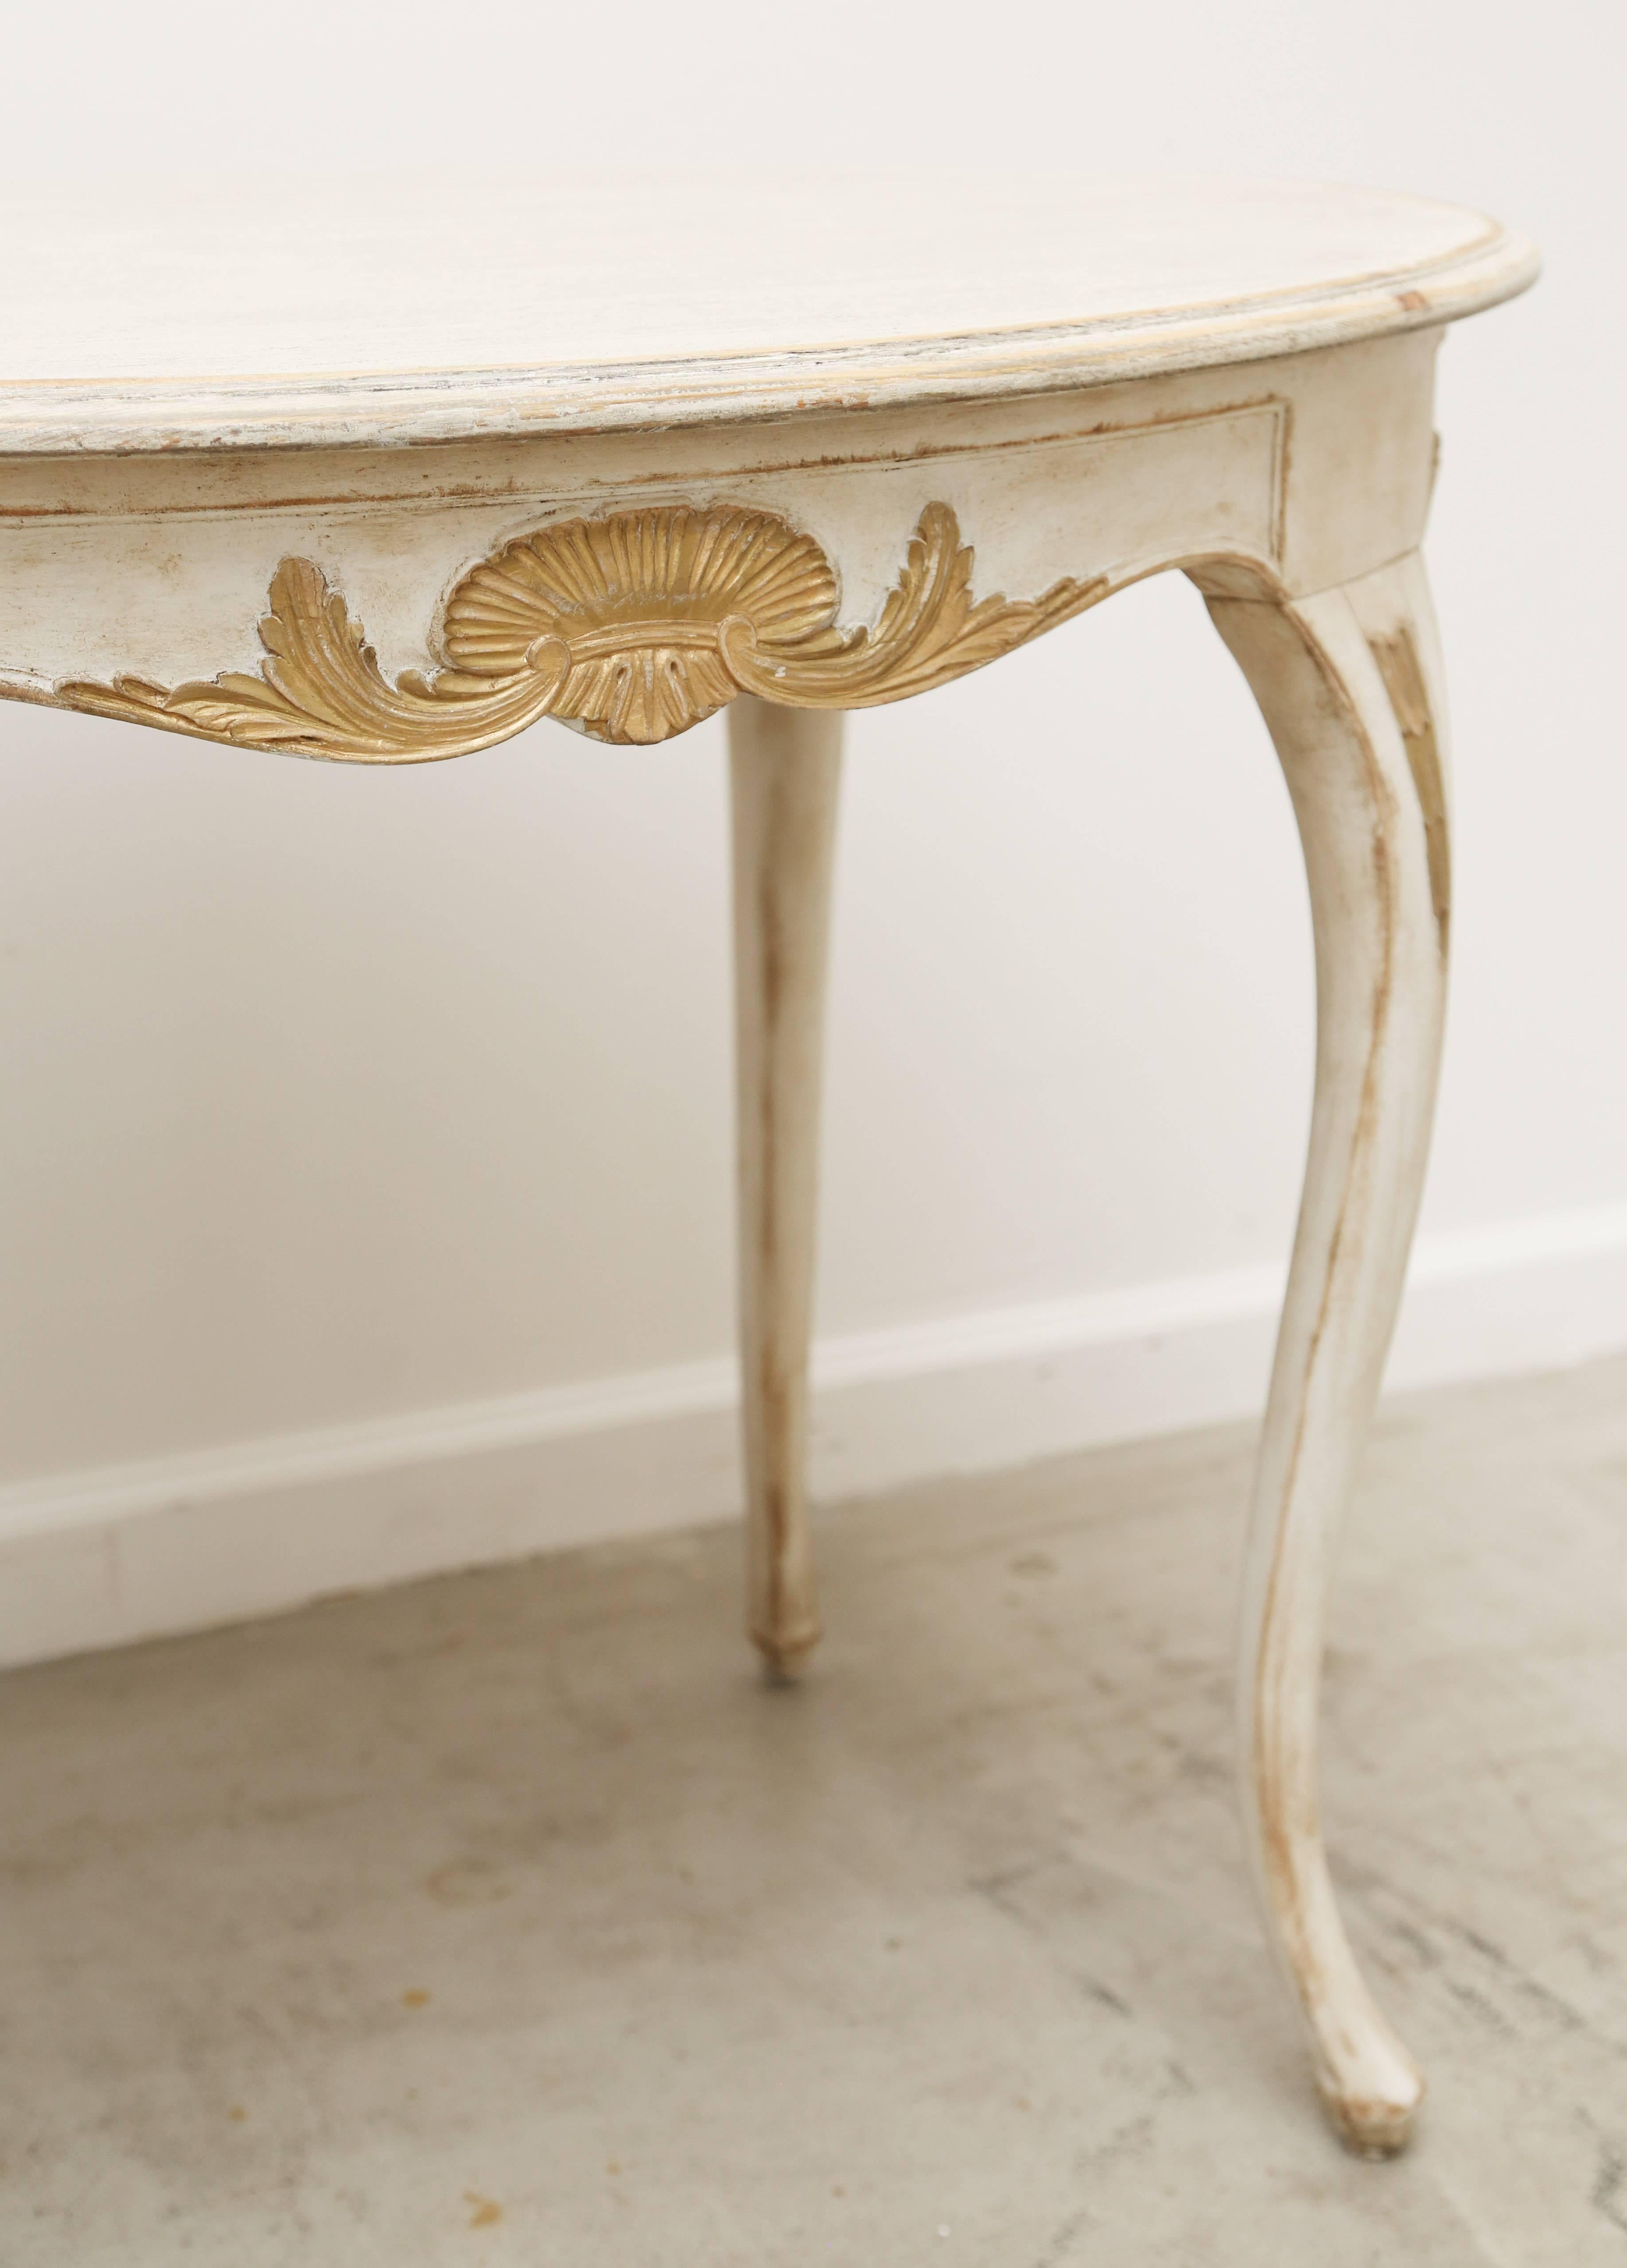 Gilt Antique Swedish Rococo Carved Oval Table Gold Leaf Details, Late 18th Century